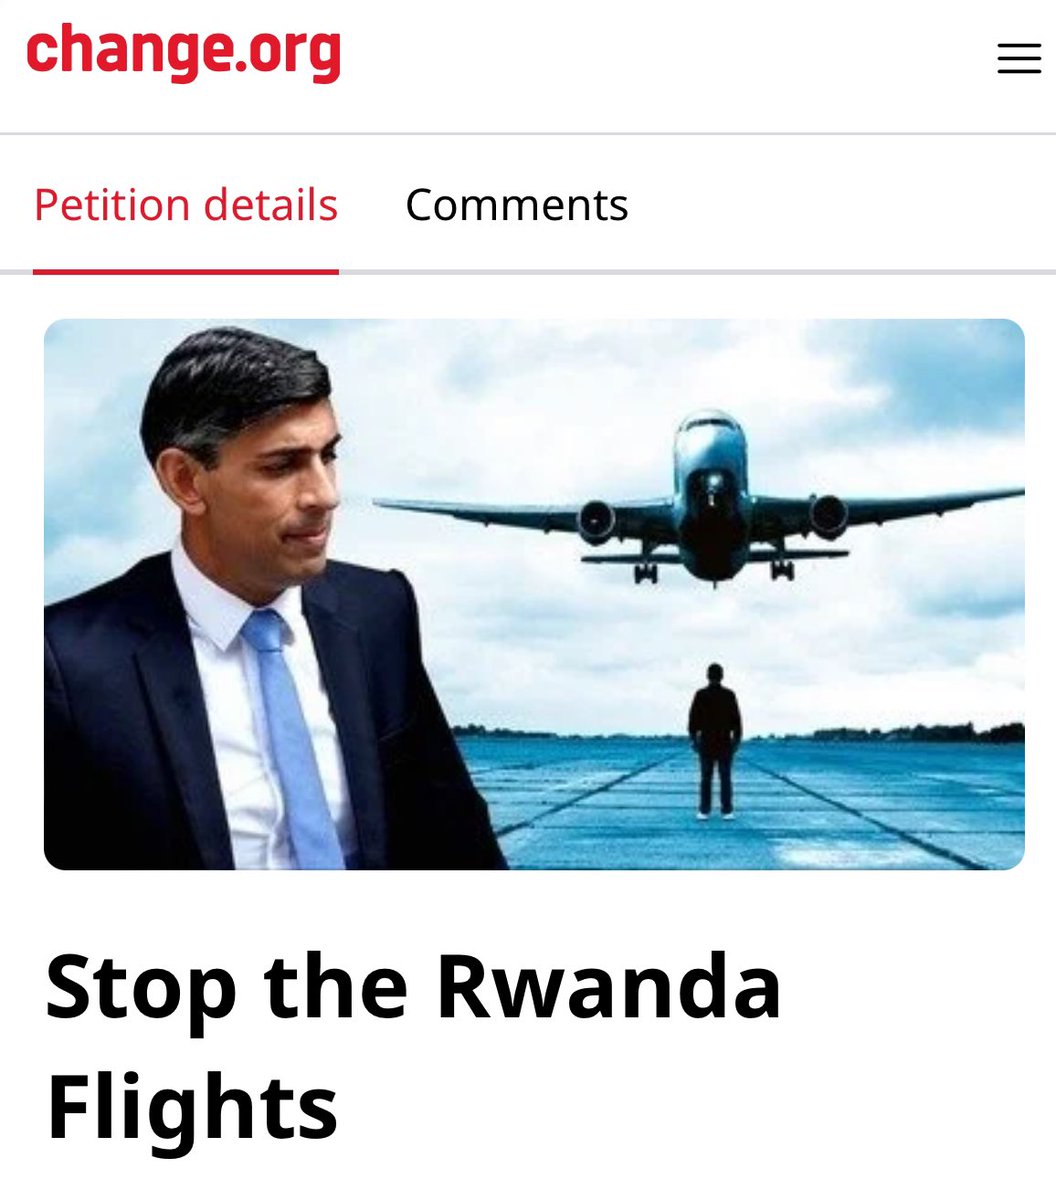 Many people appalled at our country using brutal force to drag people out and expel them to Rwanda. Show them it’s not ‘the will of the people’, show them that we welcome refugees, we are better than our government. Please sign and share this petition. chng.it/k9KpTGpKMM